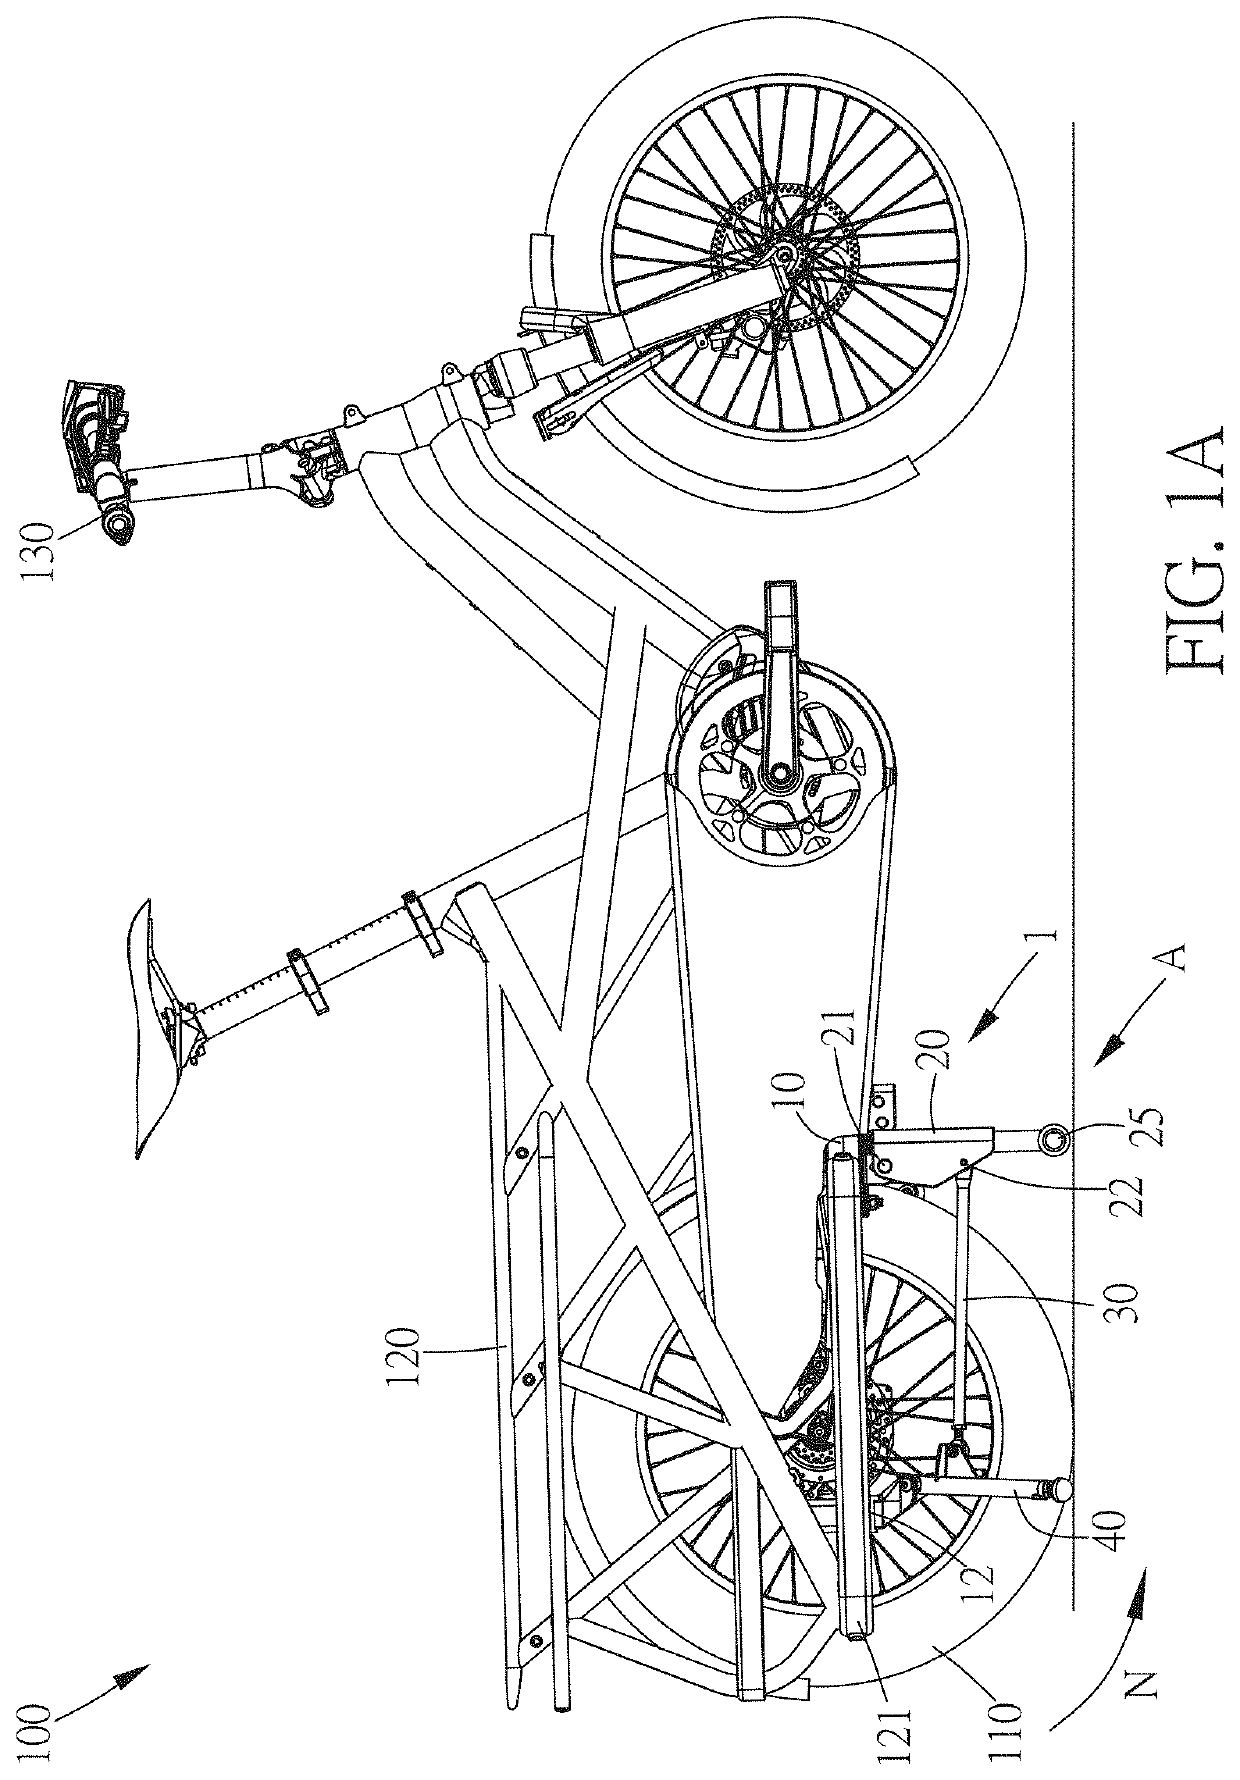 Bicycle and supporting frame thereof